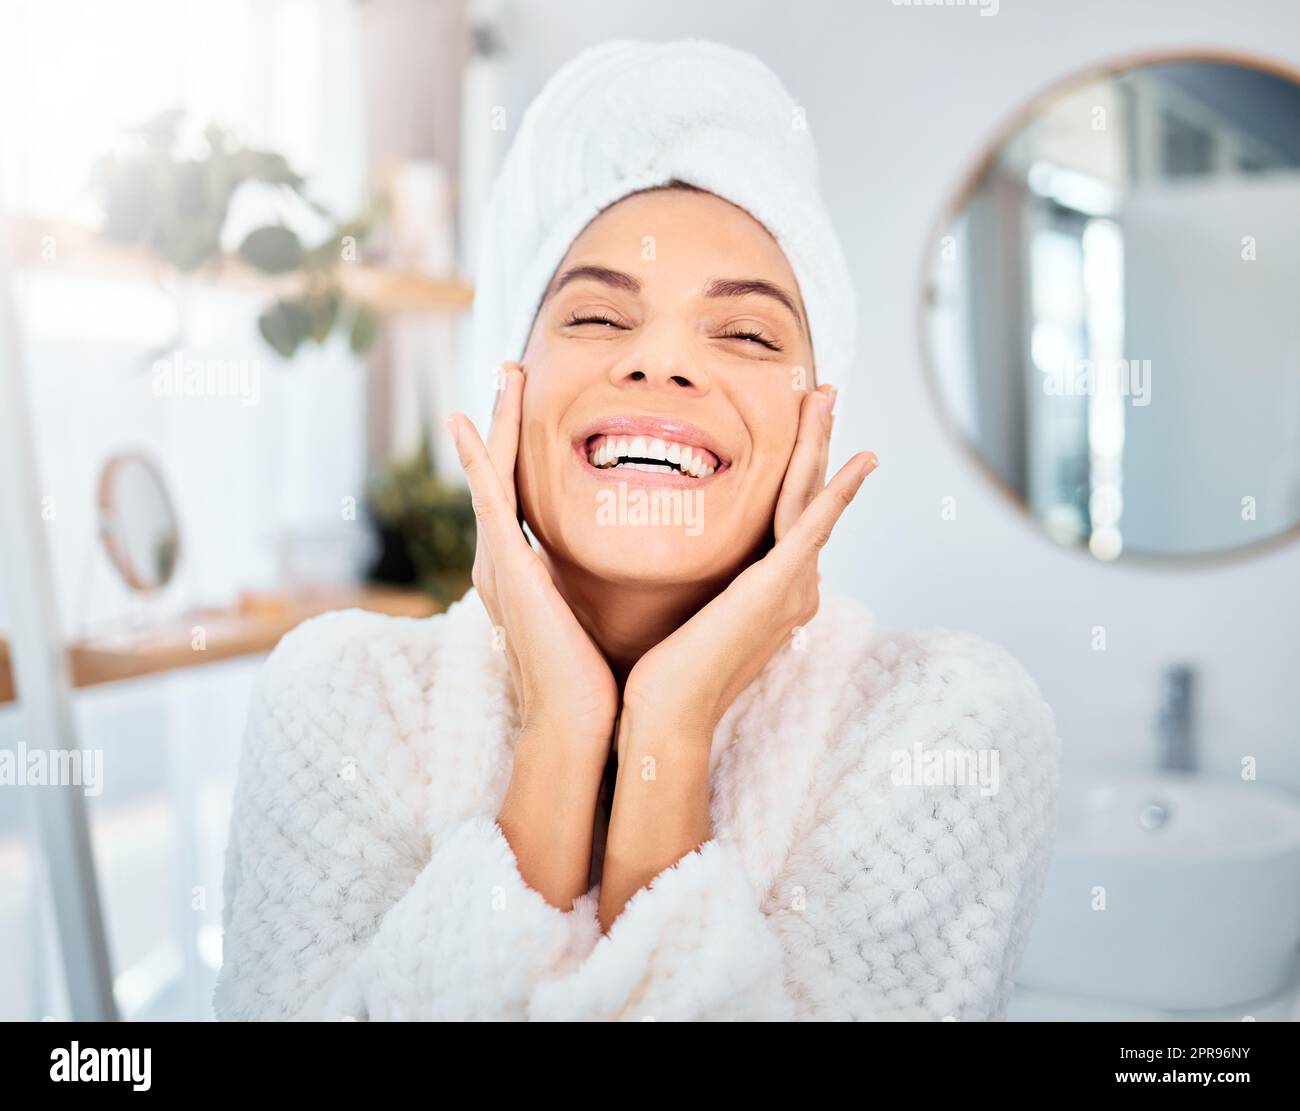 Feeling joy from the inside out. a young woman applying moisturiser to her skin in her bathroom. Stock Photo